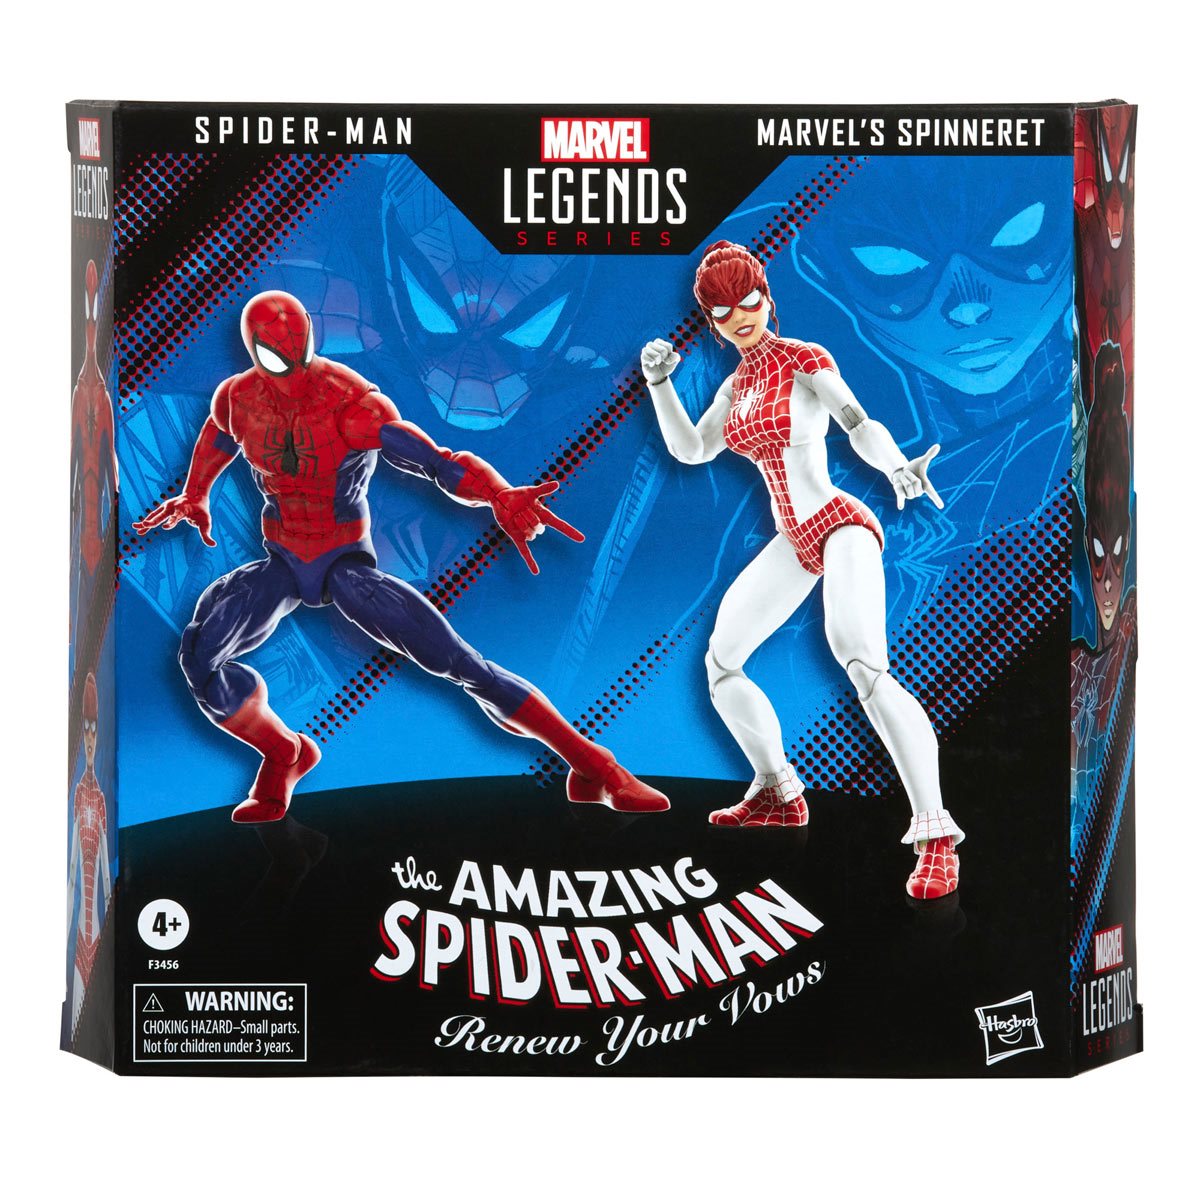 Spider-Man and Spinneret Set - The Amazing Spider-Man Hasbro Legends